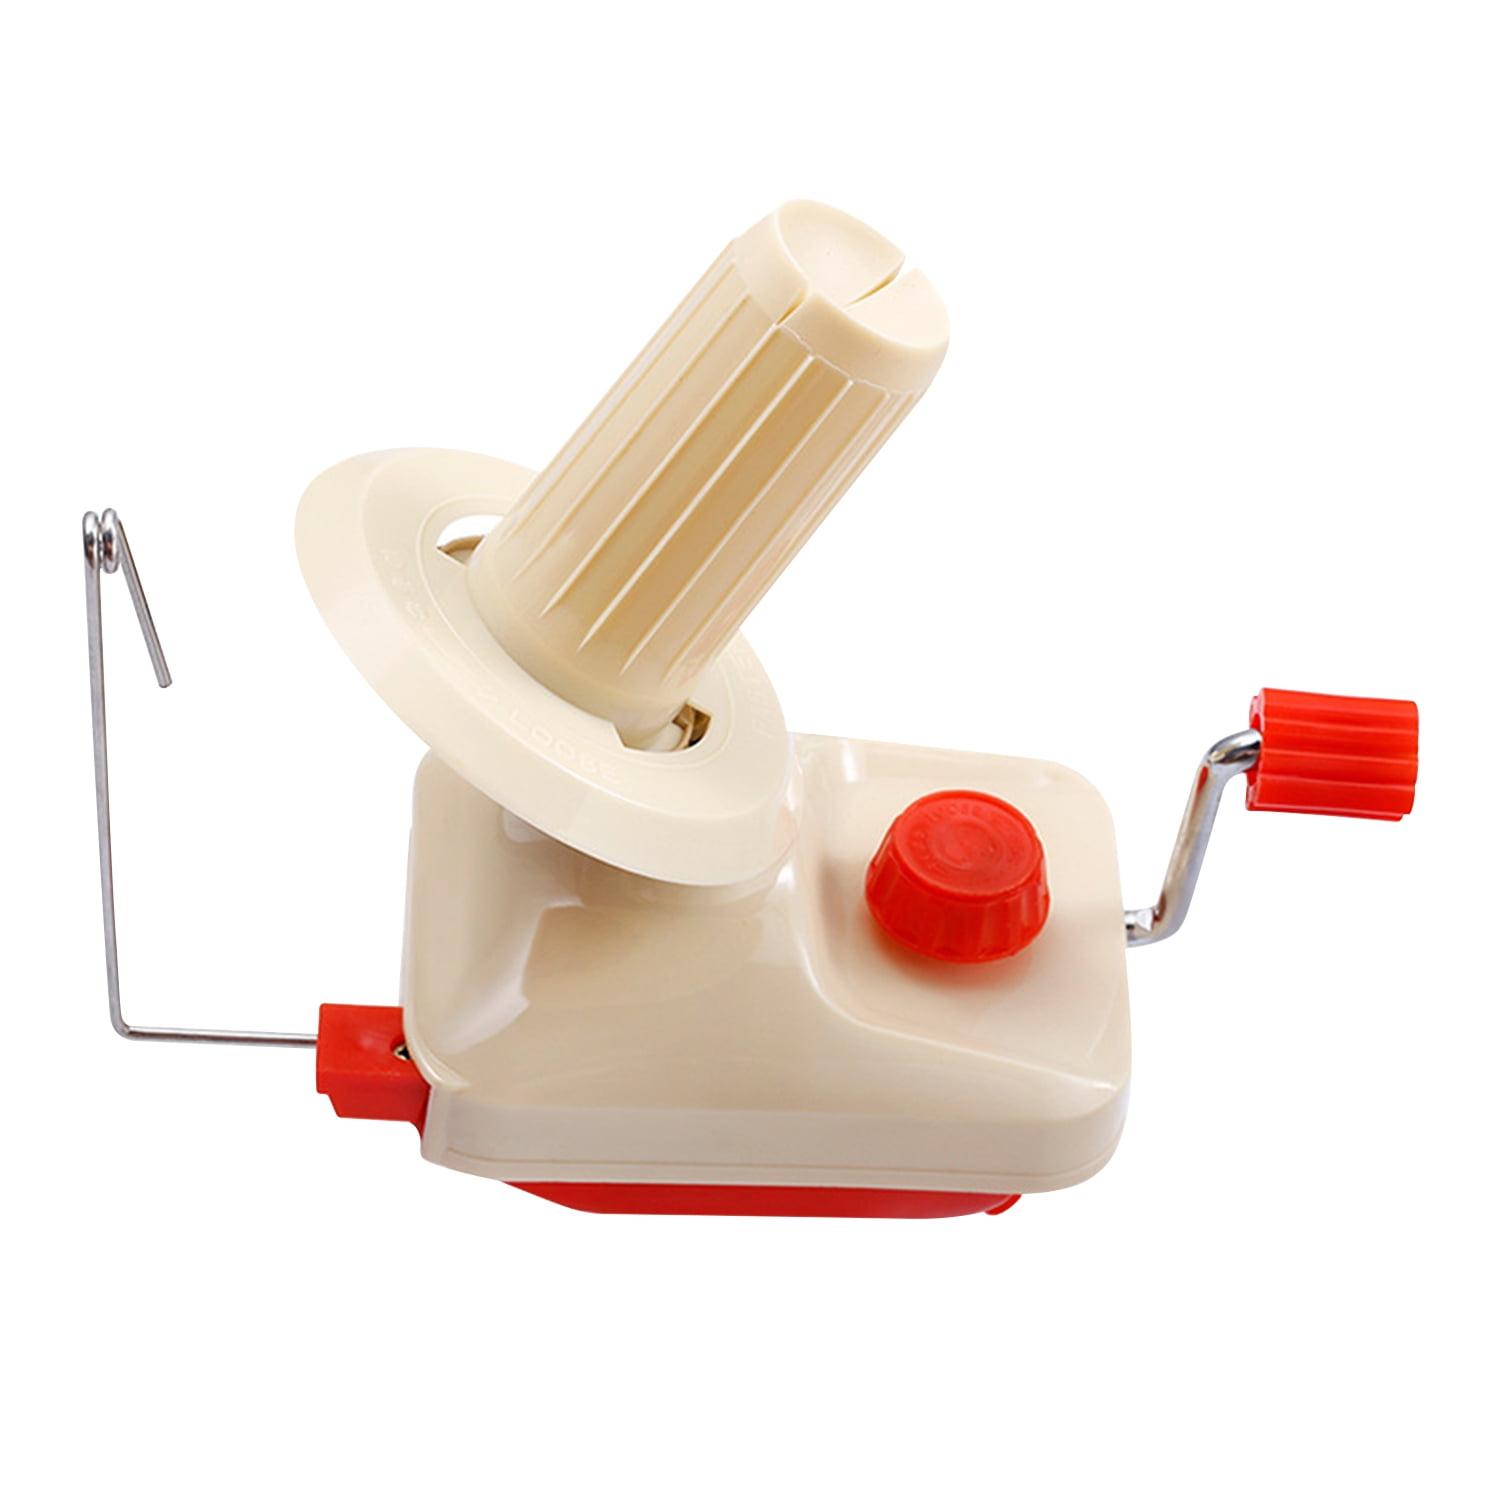 Large Yarn Ball Winder Jumbo Metal Yarn Wool String Fiber Ball Winding Tool Smooth Edges Easy Assembly Tough Enough High-speed High Yarn swift Winding Flexible 500g without yarn guide, hand operated